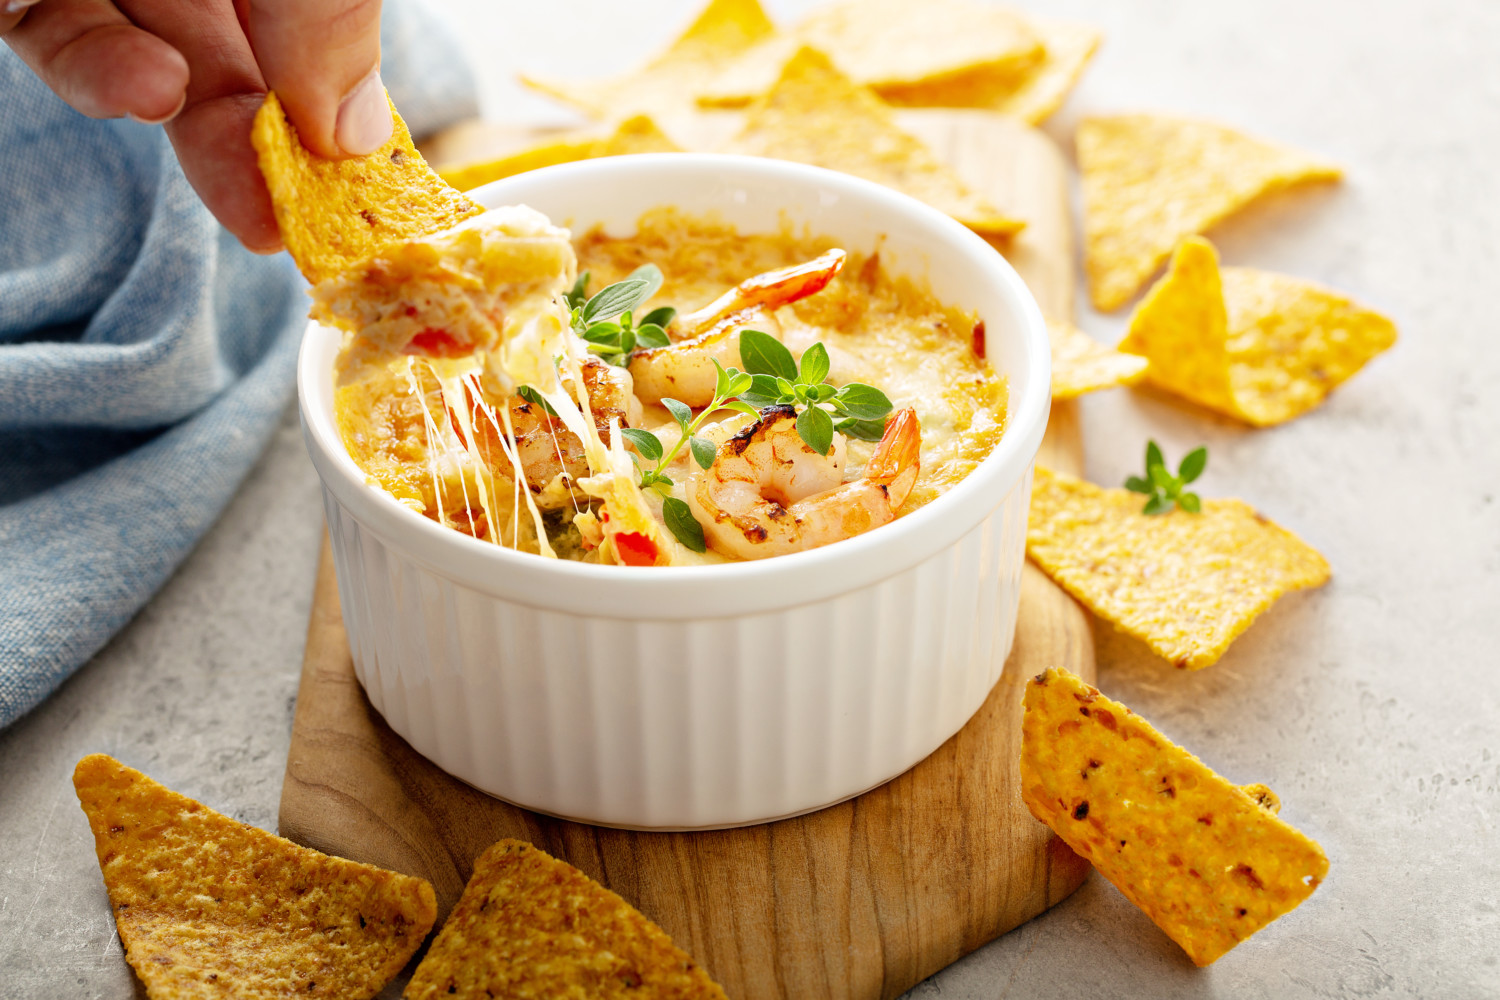 a hand scoops up a chip with hot seafood dip on it from a ramekin filled with cheesy seafood-crab dip surrounded by tortilla chips